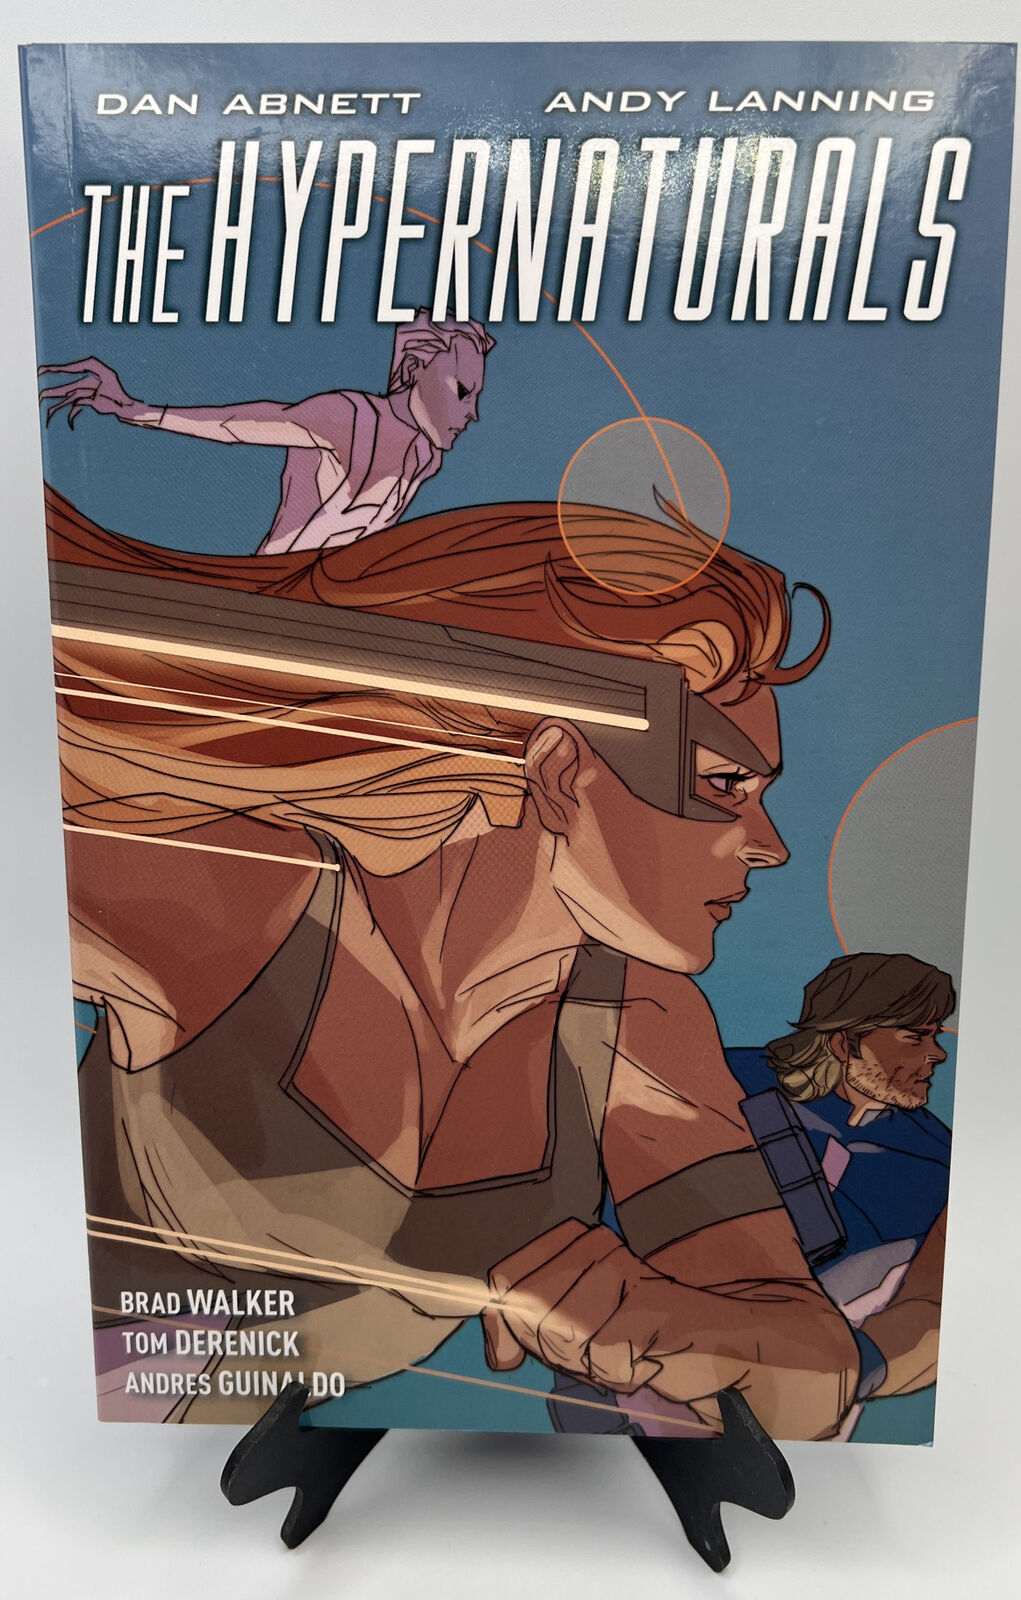 The Hypernaturals Vol. 1 by Andy Lanning and Dan Abnett (2013, Trade Paperback)